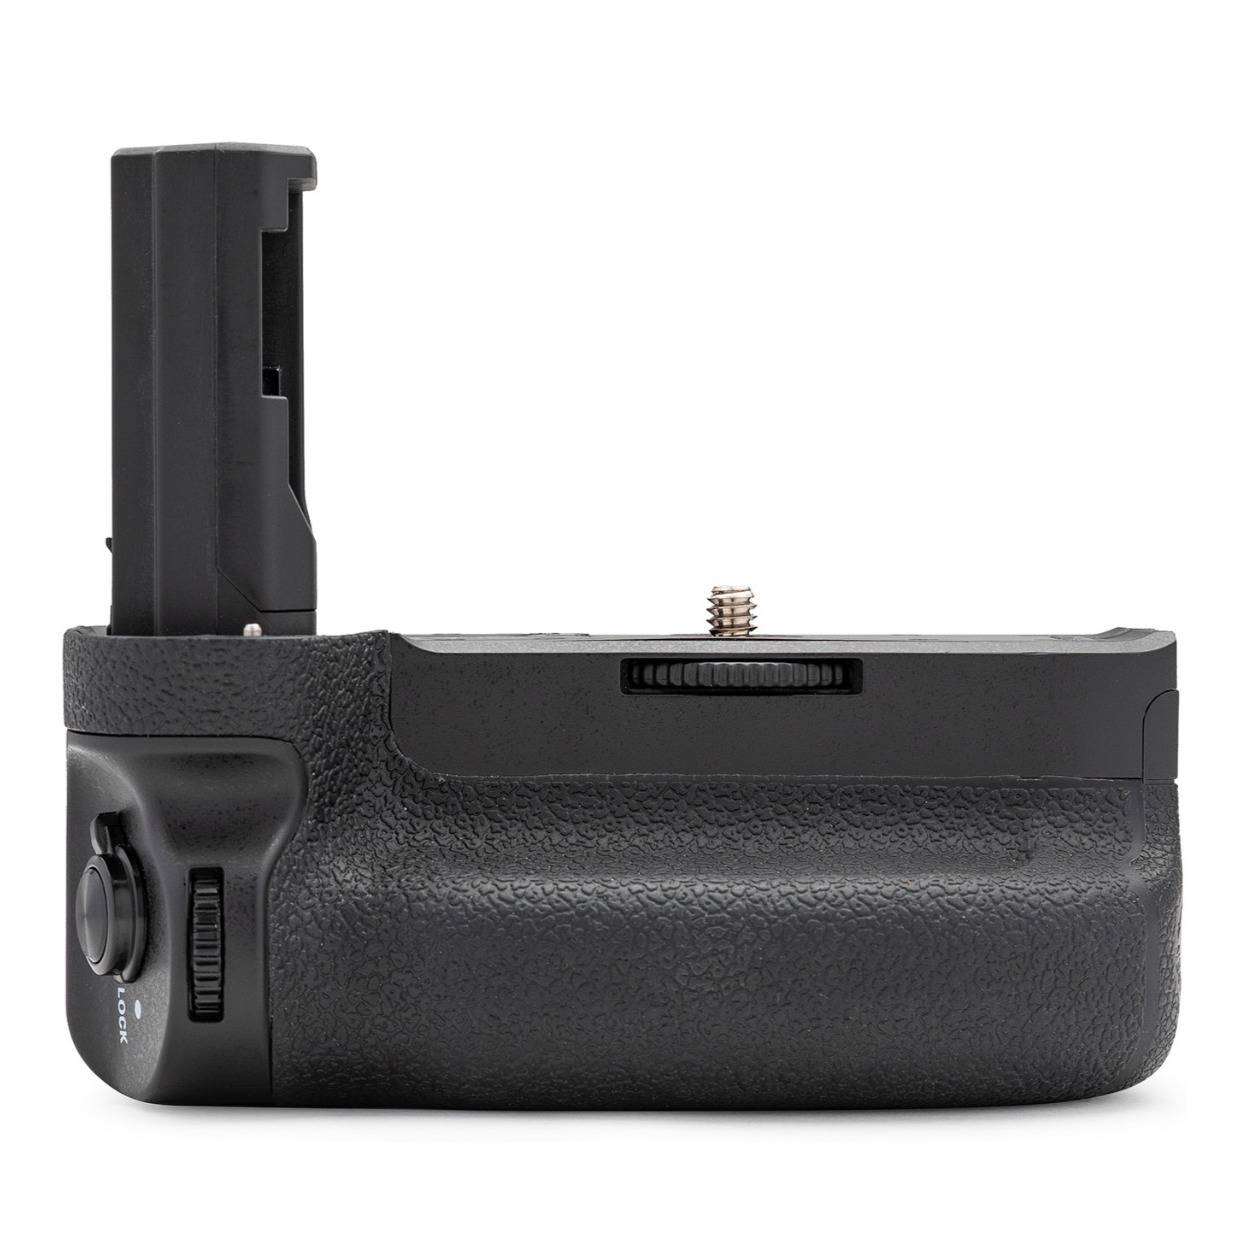 Koah Battery Grip for Sony a9, a7 r III and a7 III Camera